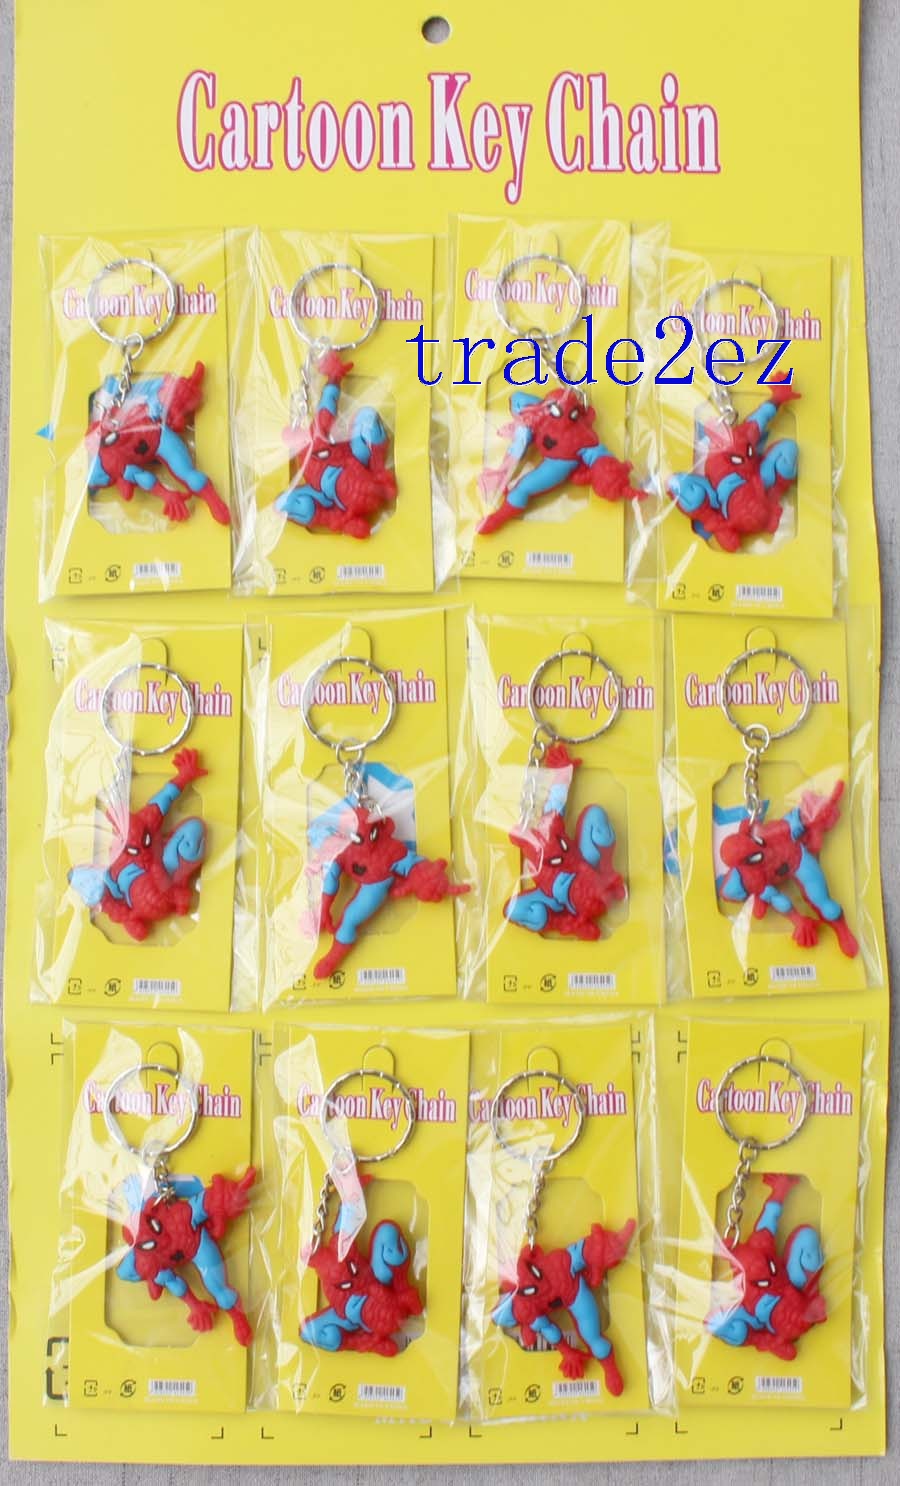 A key chain with 12 Spider-Man shapes